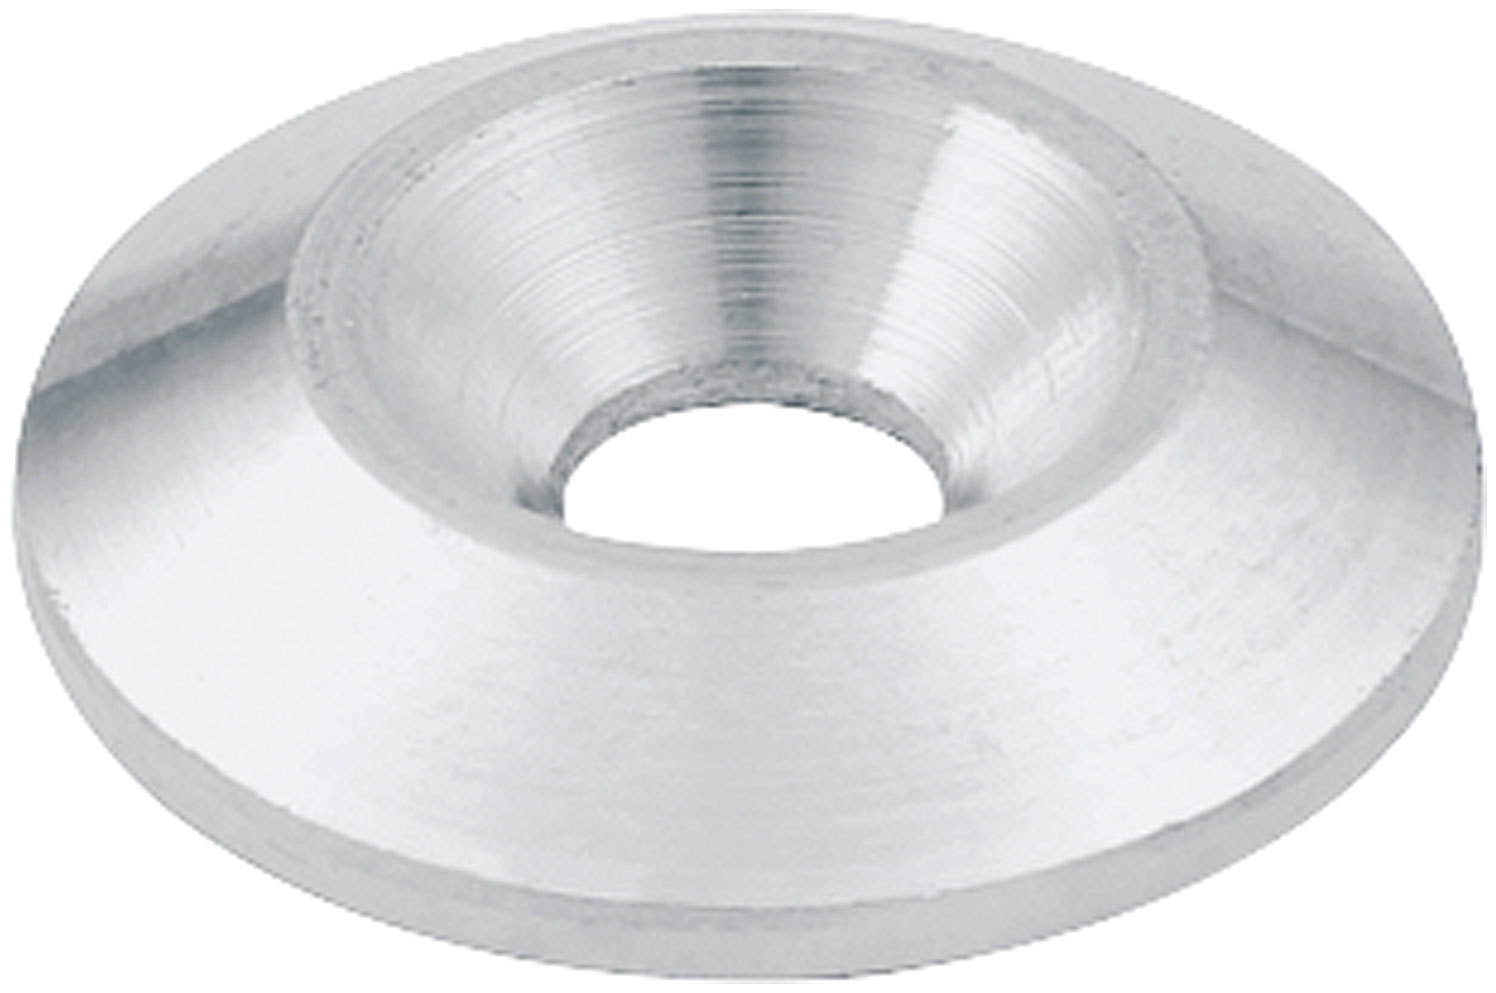 Allstar Performance 18664 - Countersunk Washer 1/4in x 1-1/4in 10pk